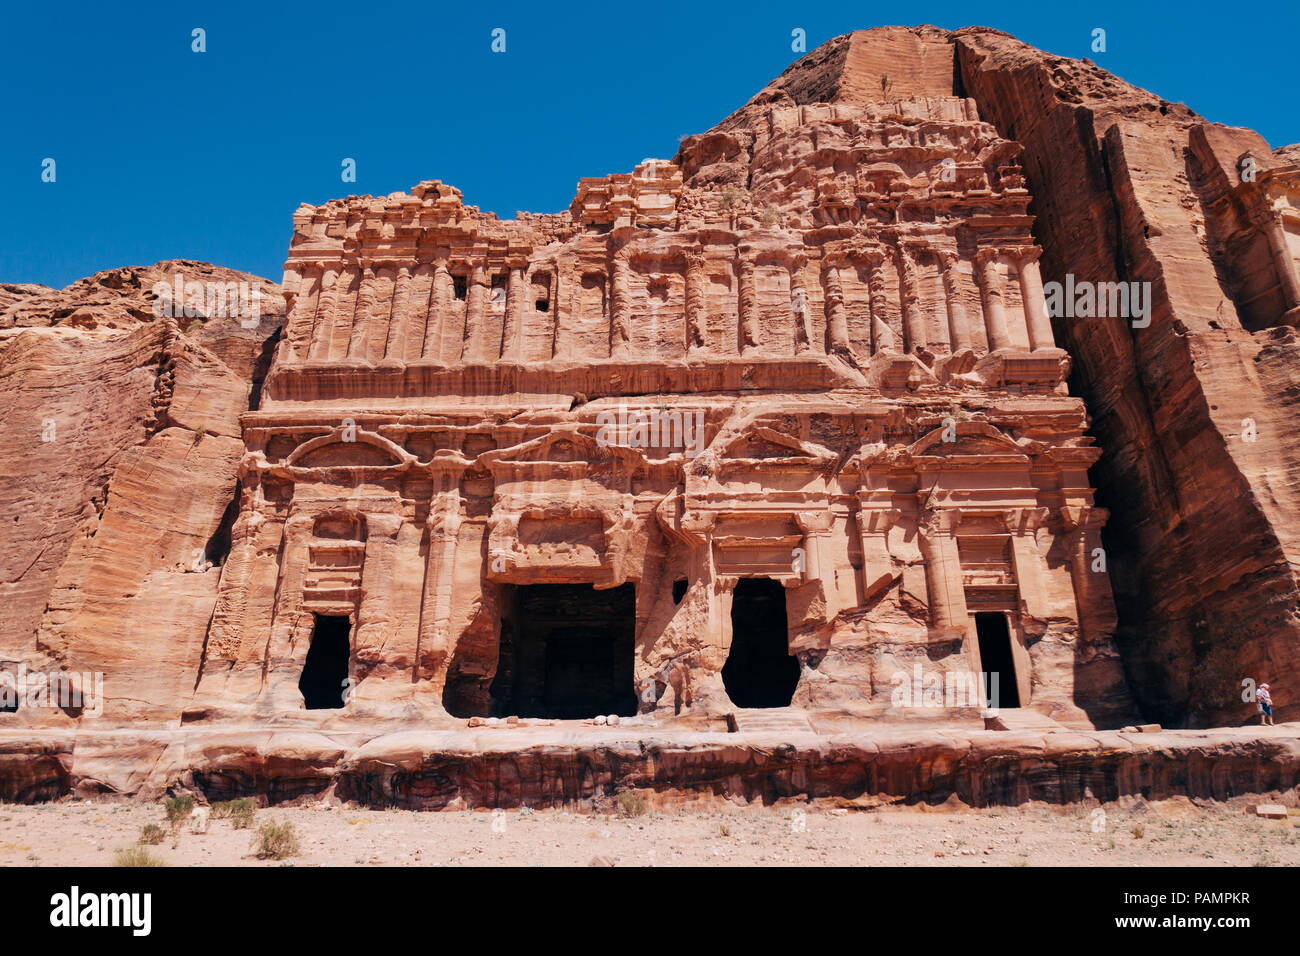 A tomb entrance carved into the rock in the Lost City of Petra, Jordan Stock Photo